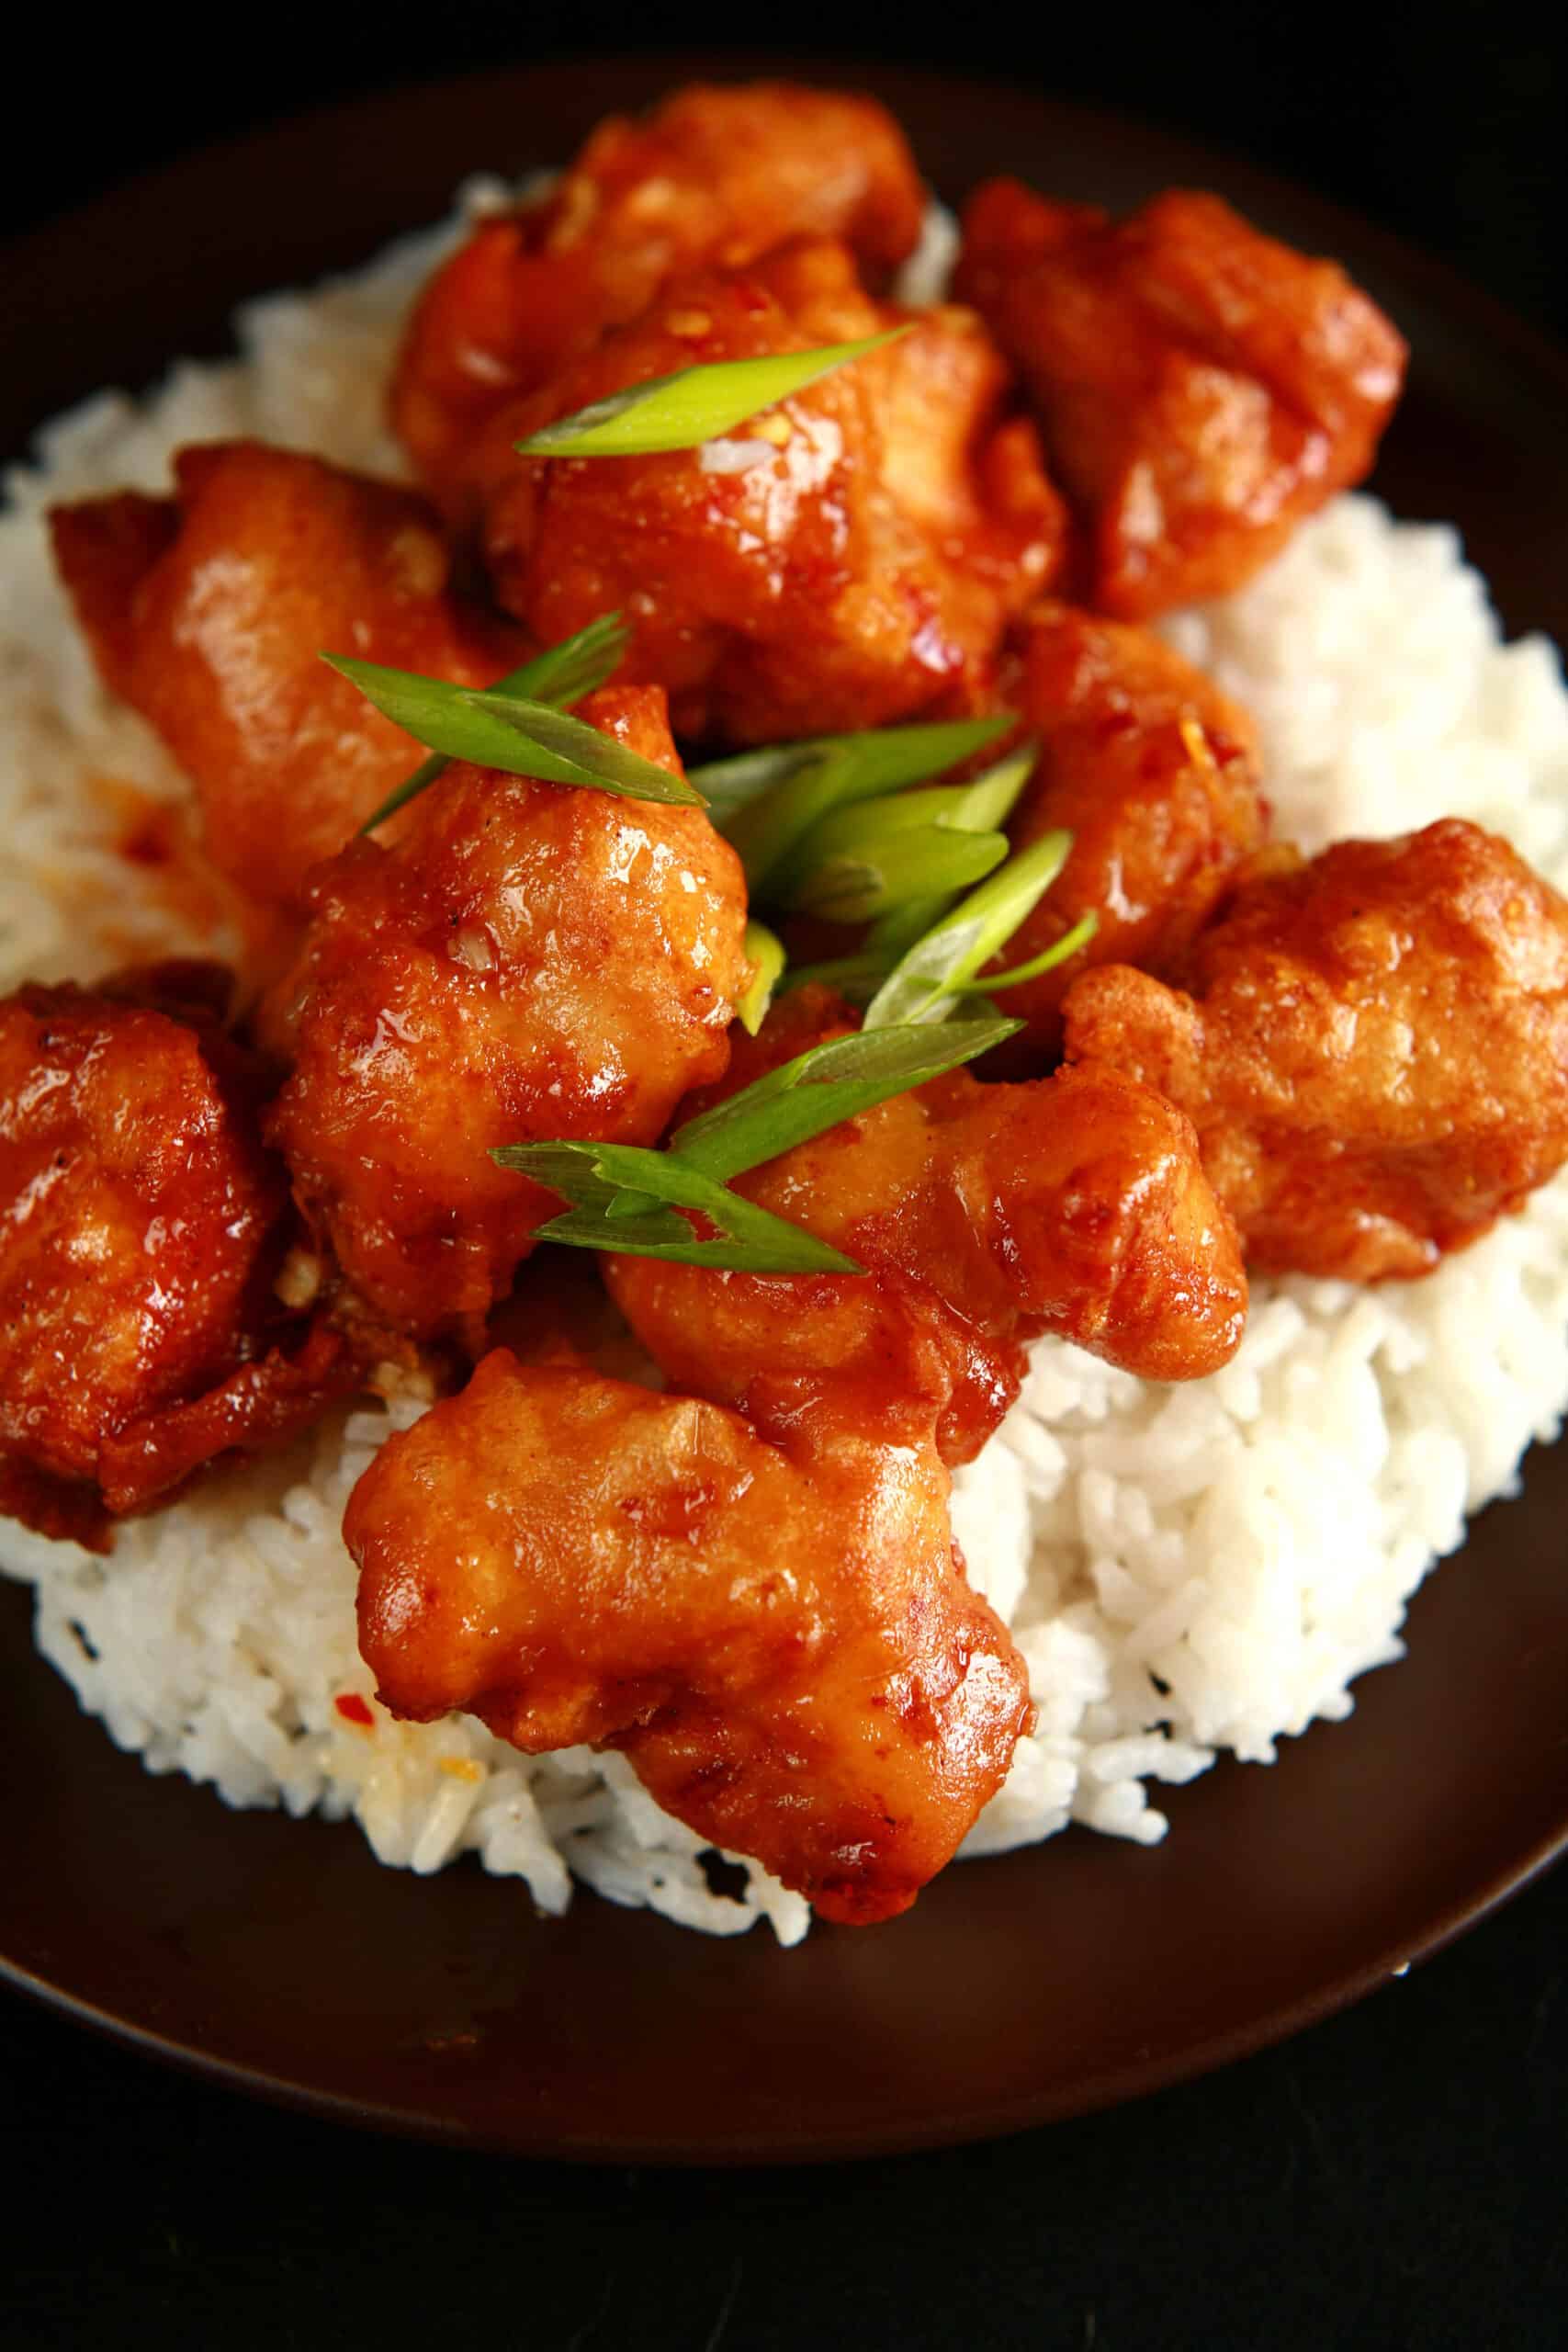 A big helping of gluten free orange chicken: Chunks of battered and deep fried chicken coated in a glossy orange sauce, garnished with sliced green onions, and served over a bed of rice.